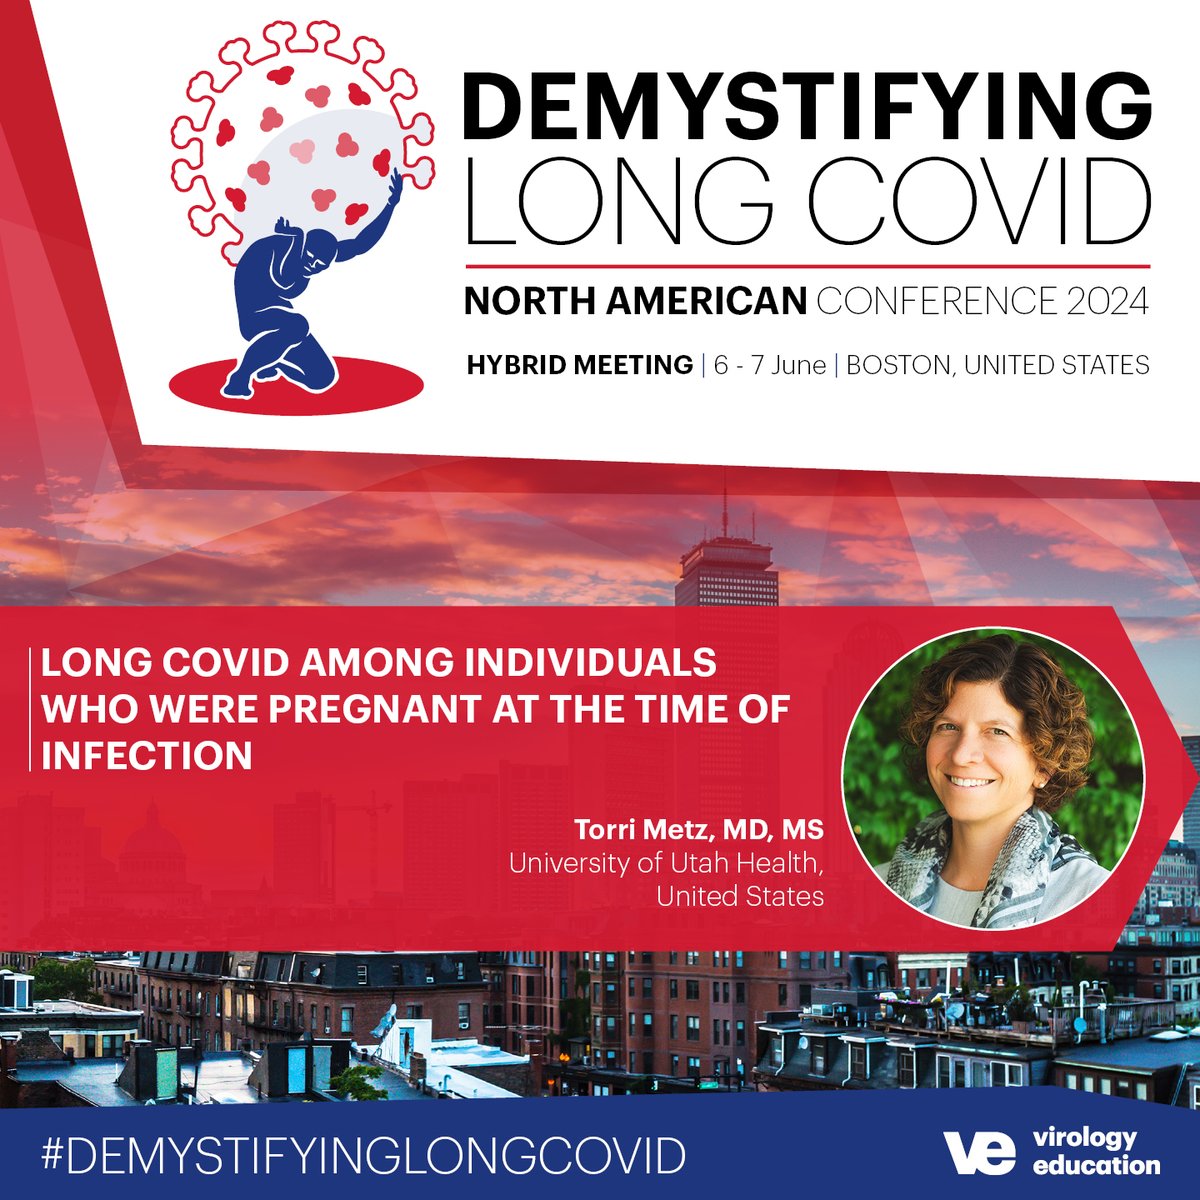 Only 3 weeks to go! #DemystifyingLongCOVID Have you secured your spot for this regional conference dedicated to raising awareness & unravelling the mysteries surrounding #LongCOVID? Explore the program & register: amededu.co/4anq536